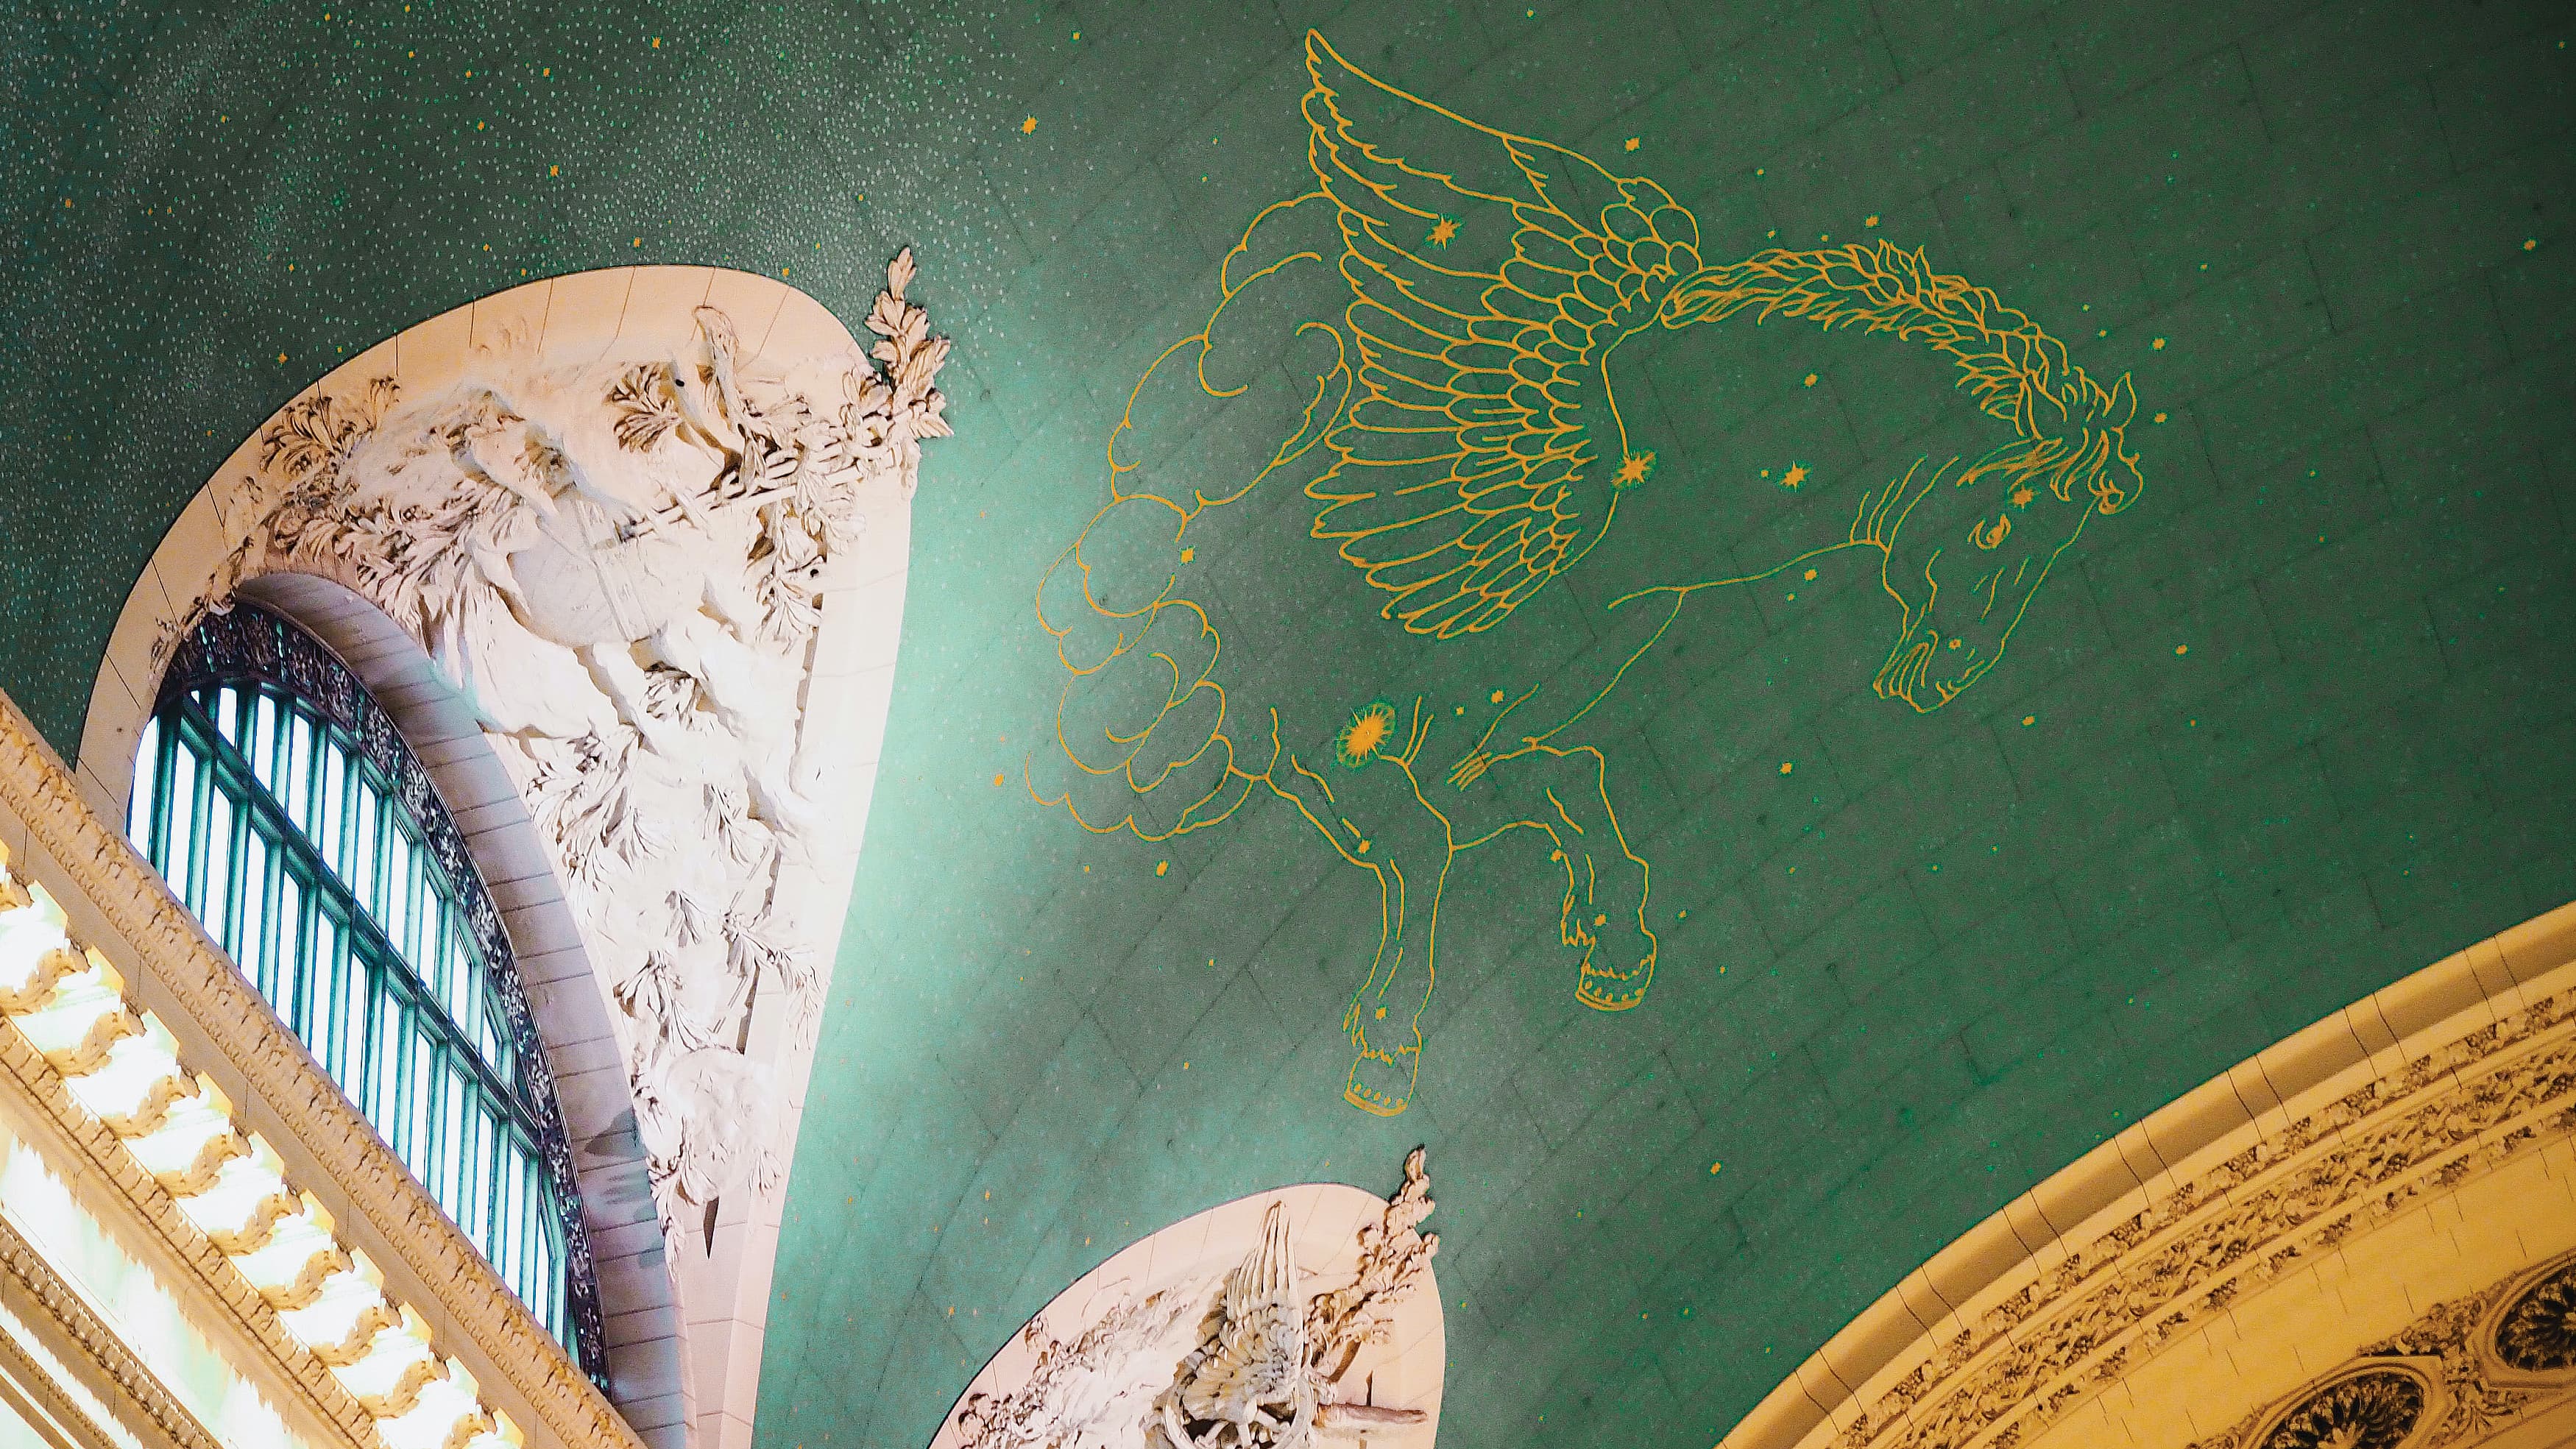 Painted mural on the large ceiling of Grand Central Terminal in New York City.